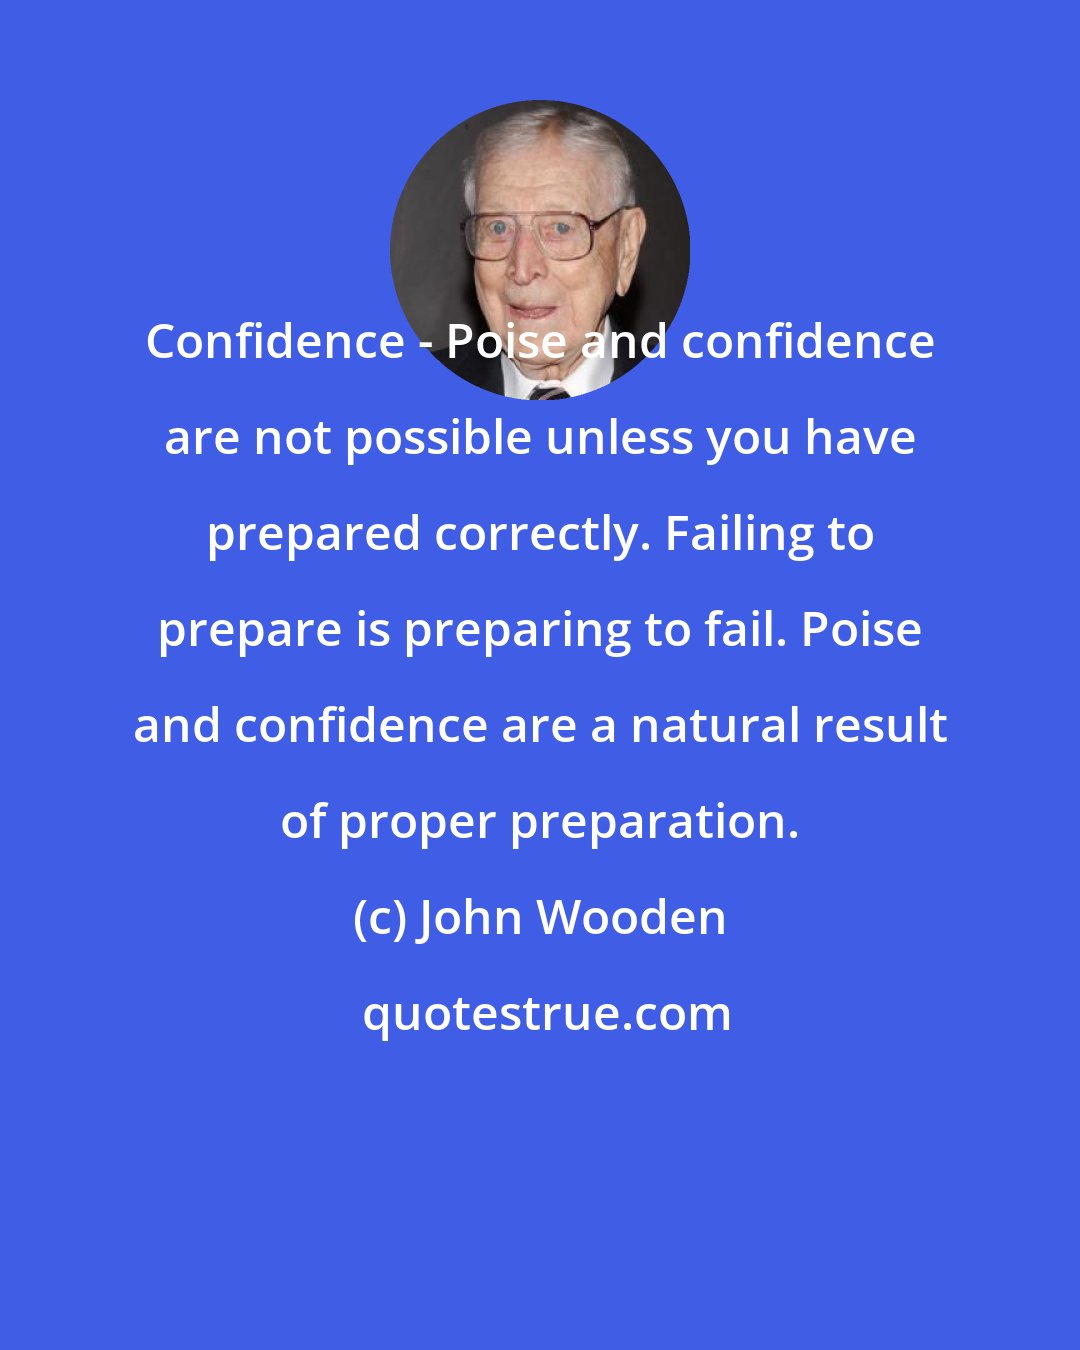 John Wooden: Confidence - Poise and confidence are not possible unless you have prepared correctly. Failing to prepare is preparing to fail. Poise and confidence are a natural result of proper preparation.